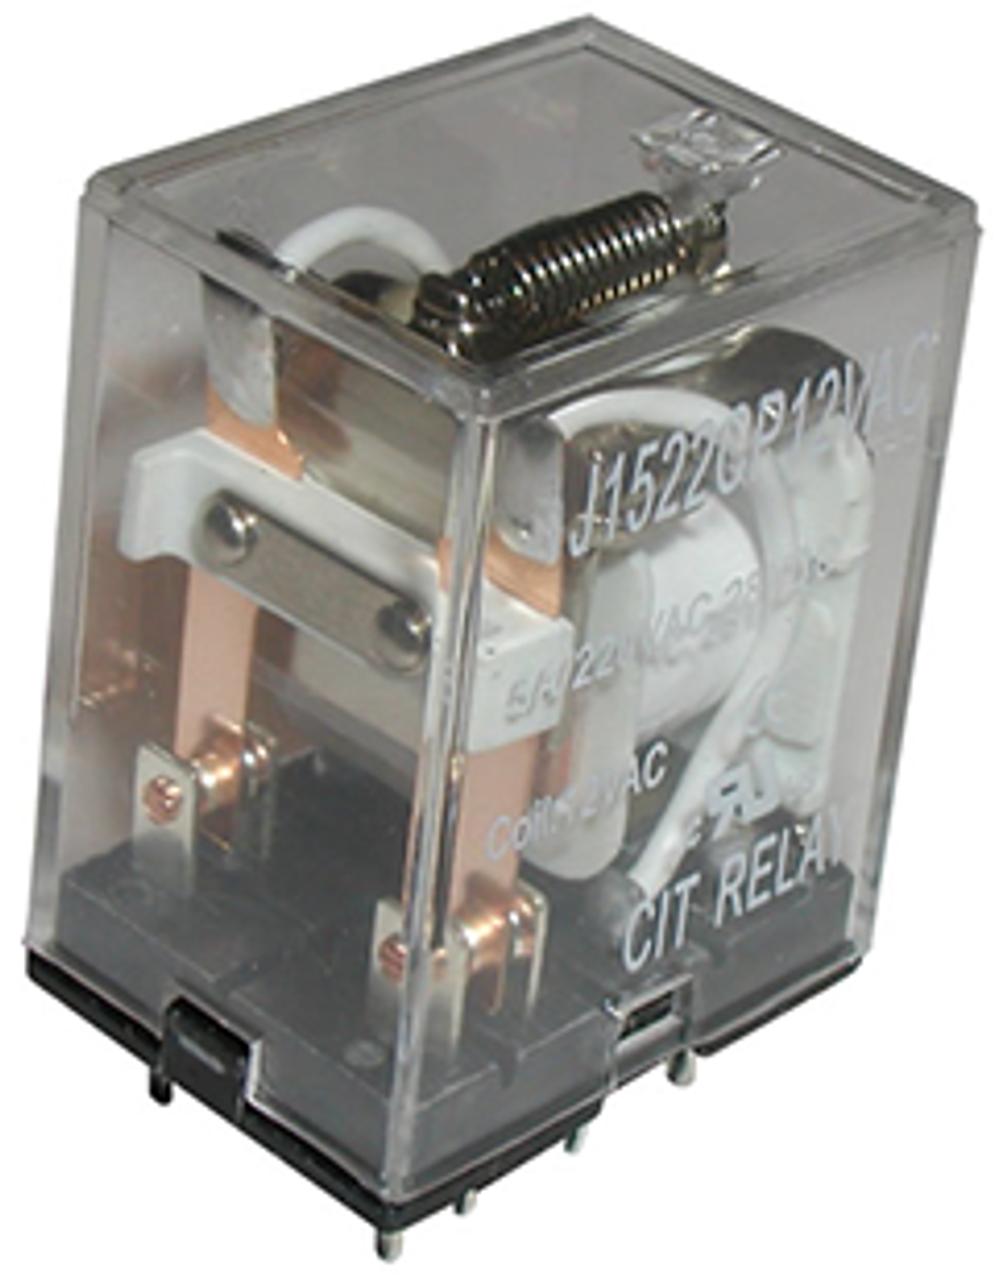 CIT Relay and Switch J1524CT24VAC Industrial Relays